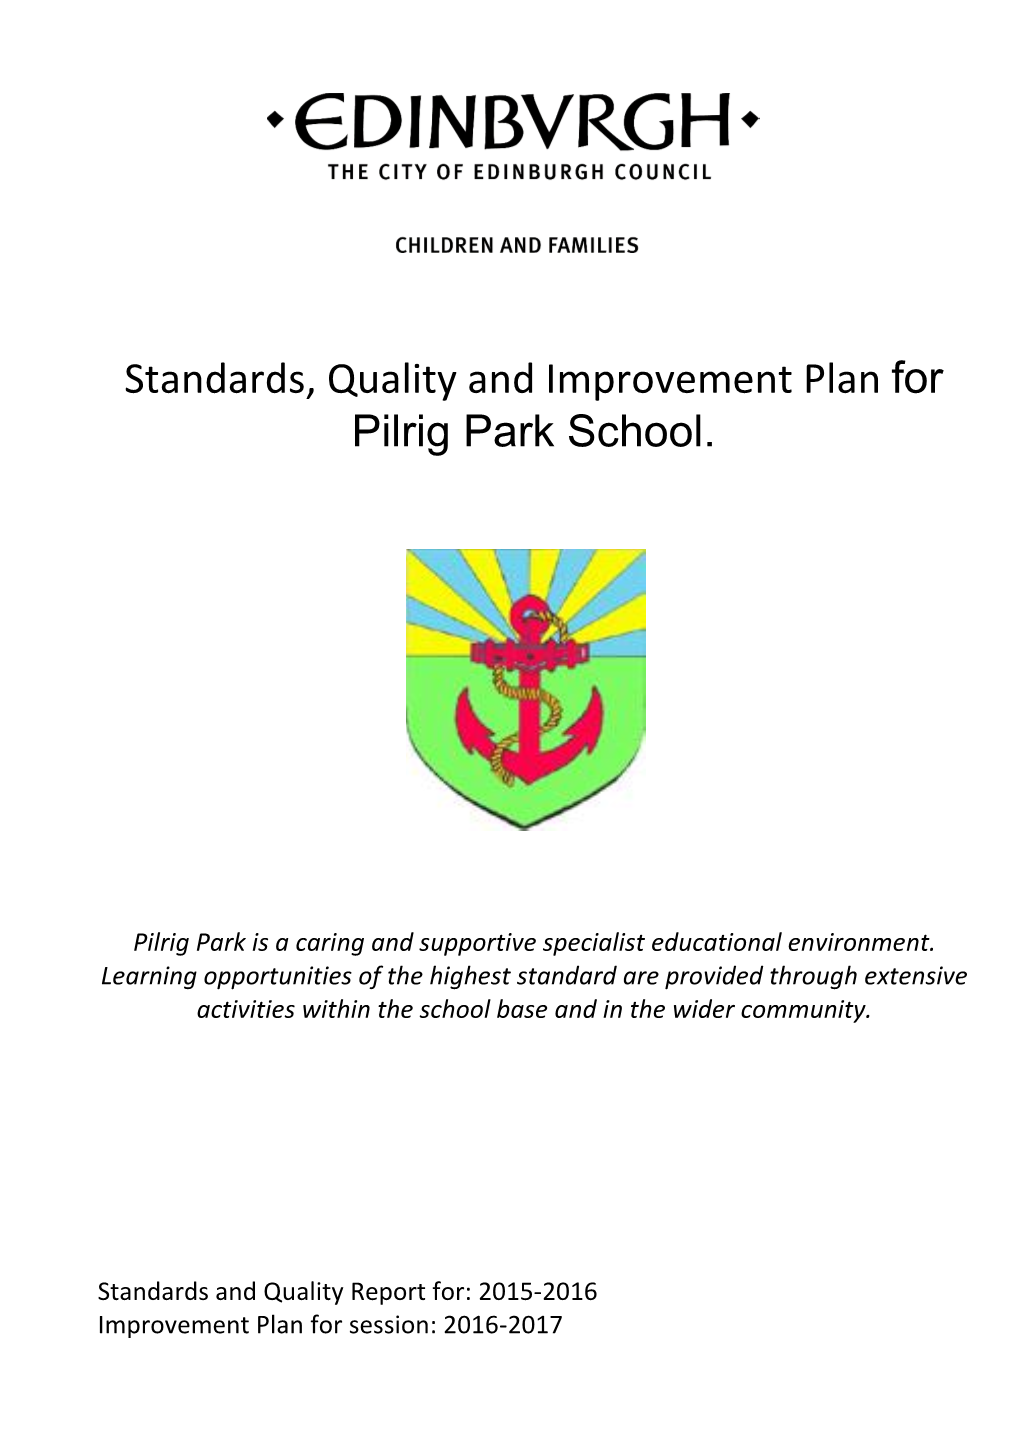 Standards, Quality and Improvement Plan for Pilrig Park School